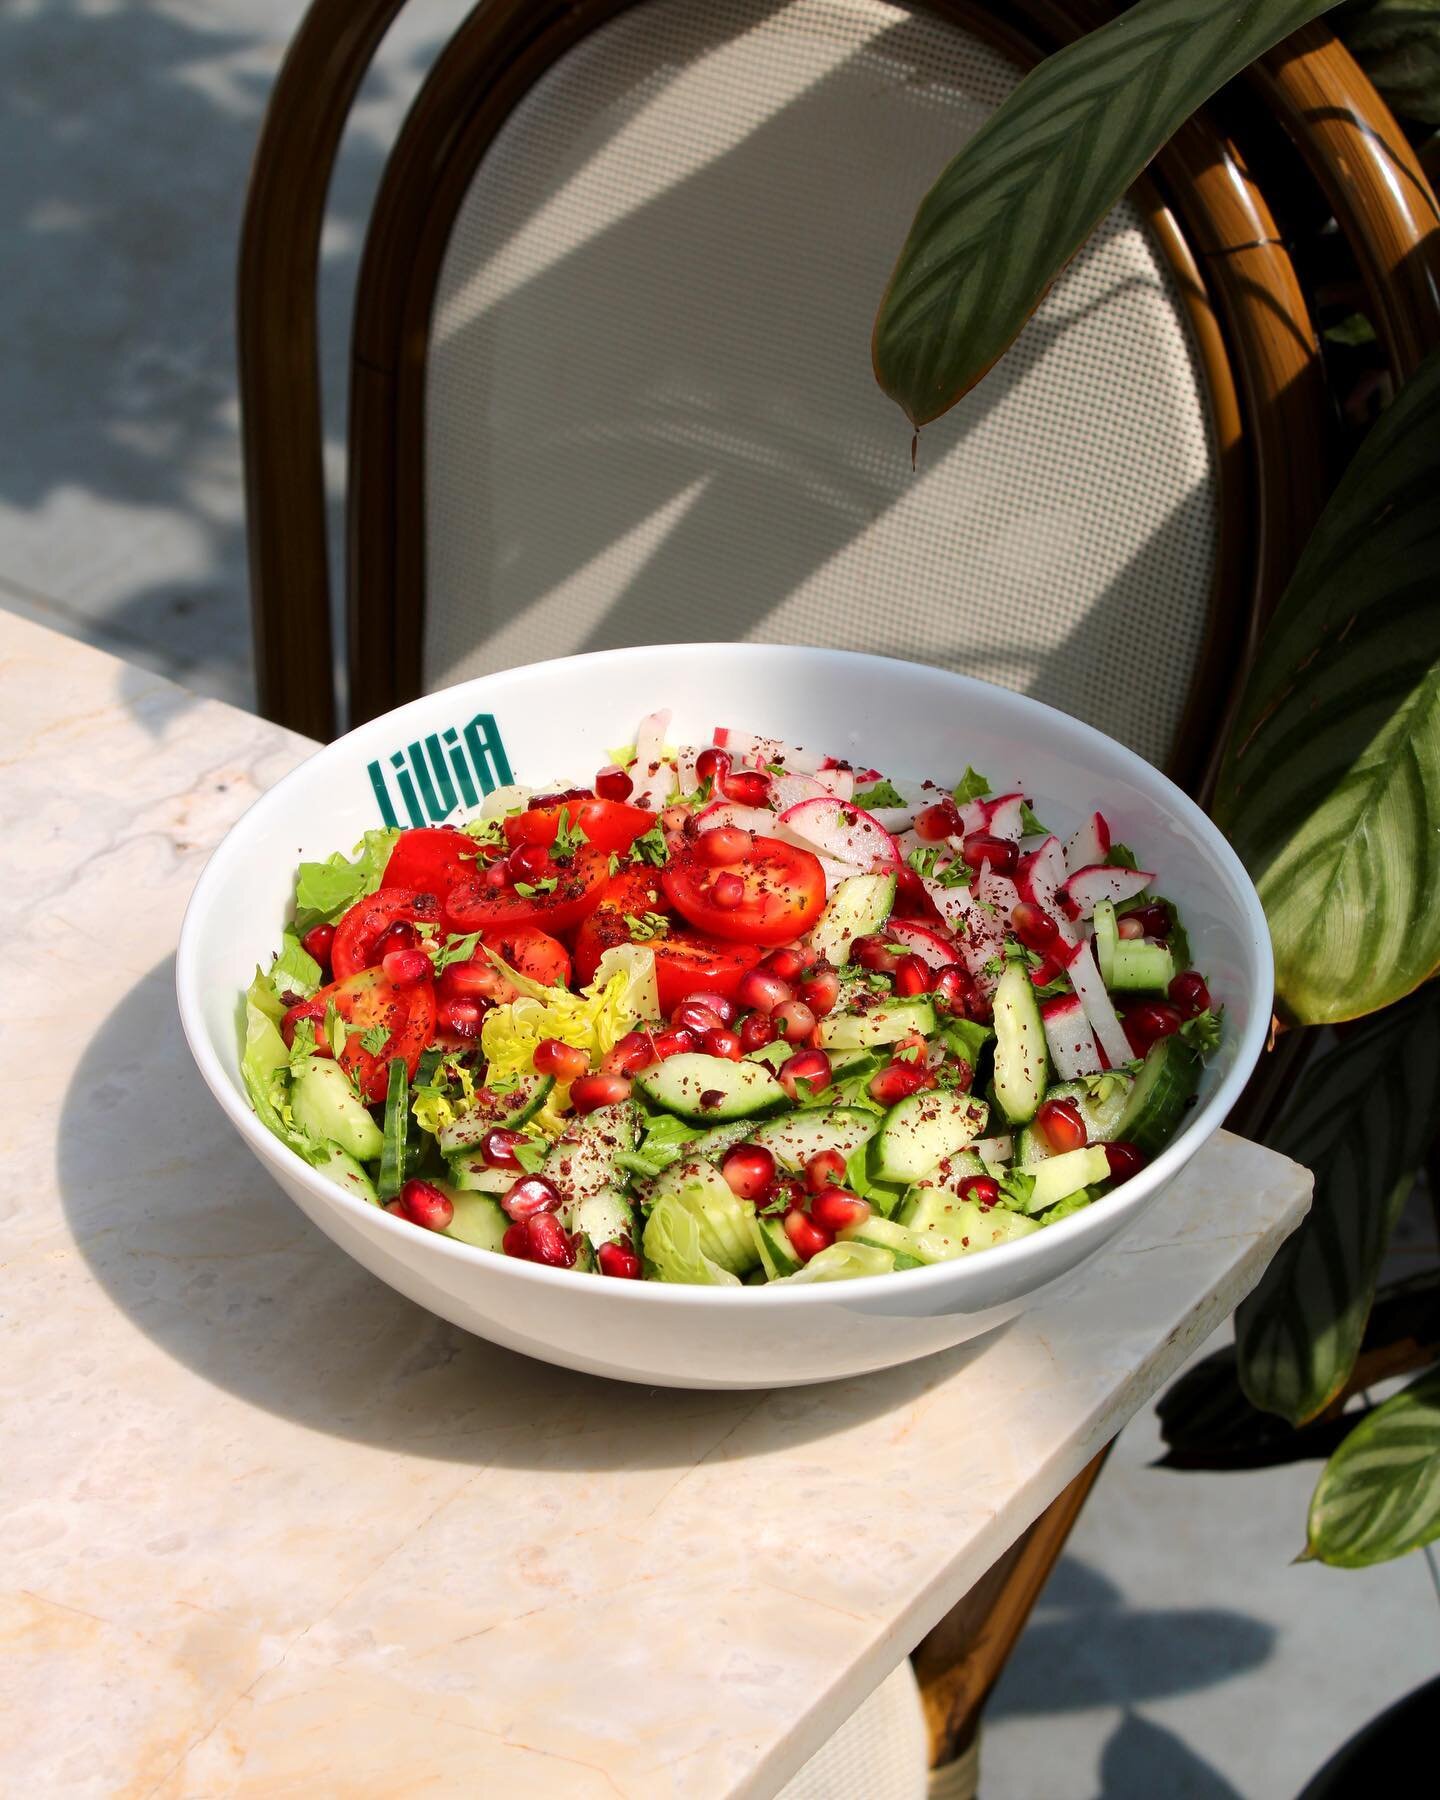 Tastes like we don&rsquo;t want summer to end 🥗 Our Fattoush is packed with color, flavor and nutritious ingredients like radish, sumac, pomegranates, mint, cucumber and more! Literally summer in a bol.
.
Si l'&eacute;t&eacute; &eacute;tait une sala